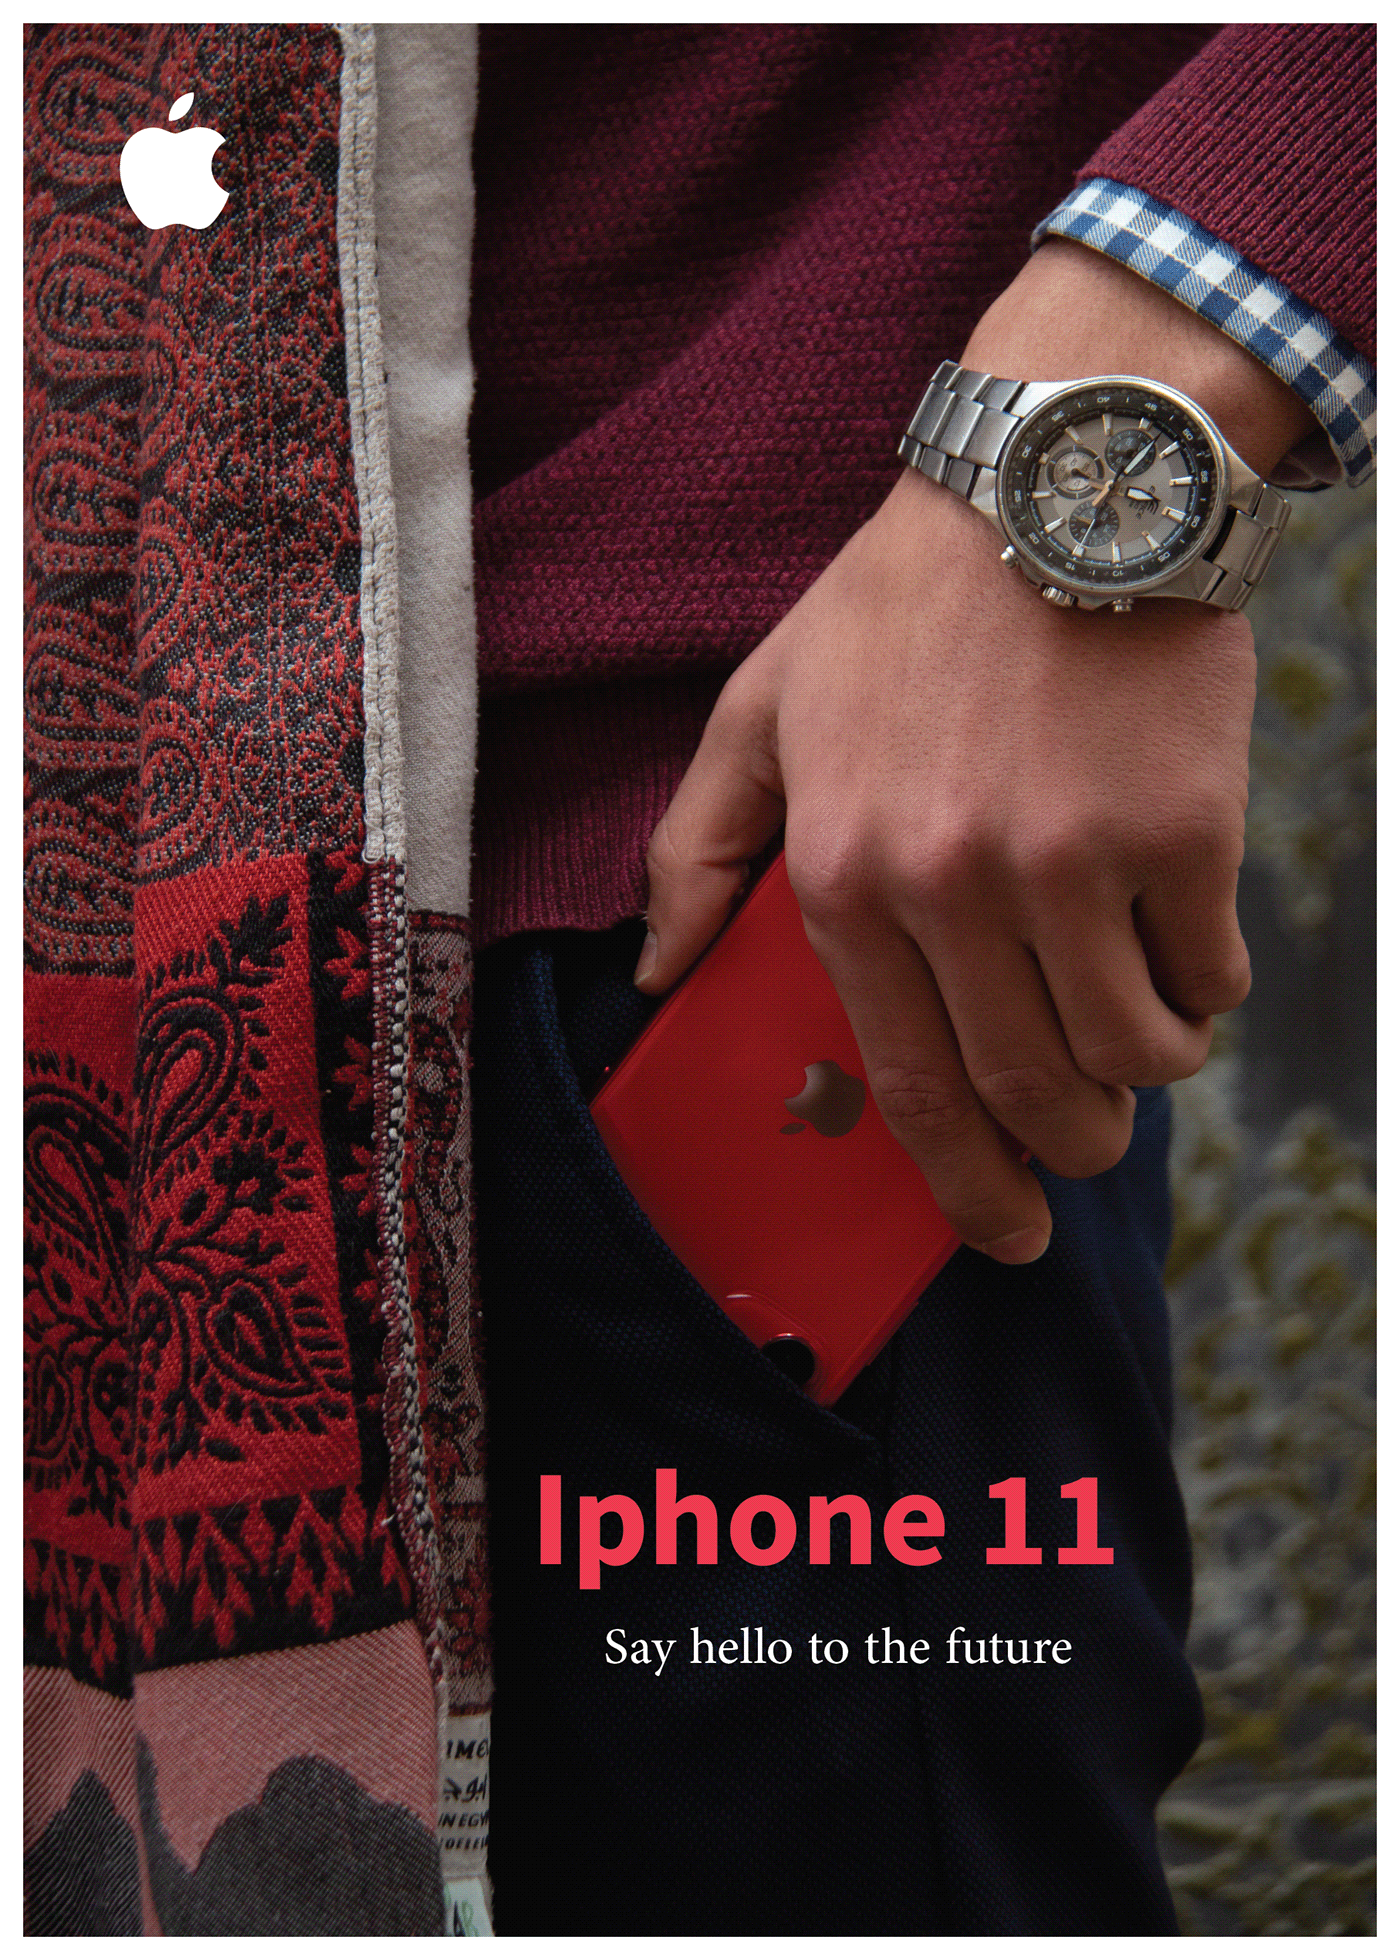 I phone 11
Apple
Phone mobile my shots my work Photography  poster